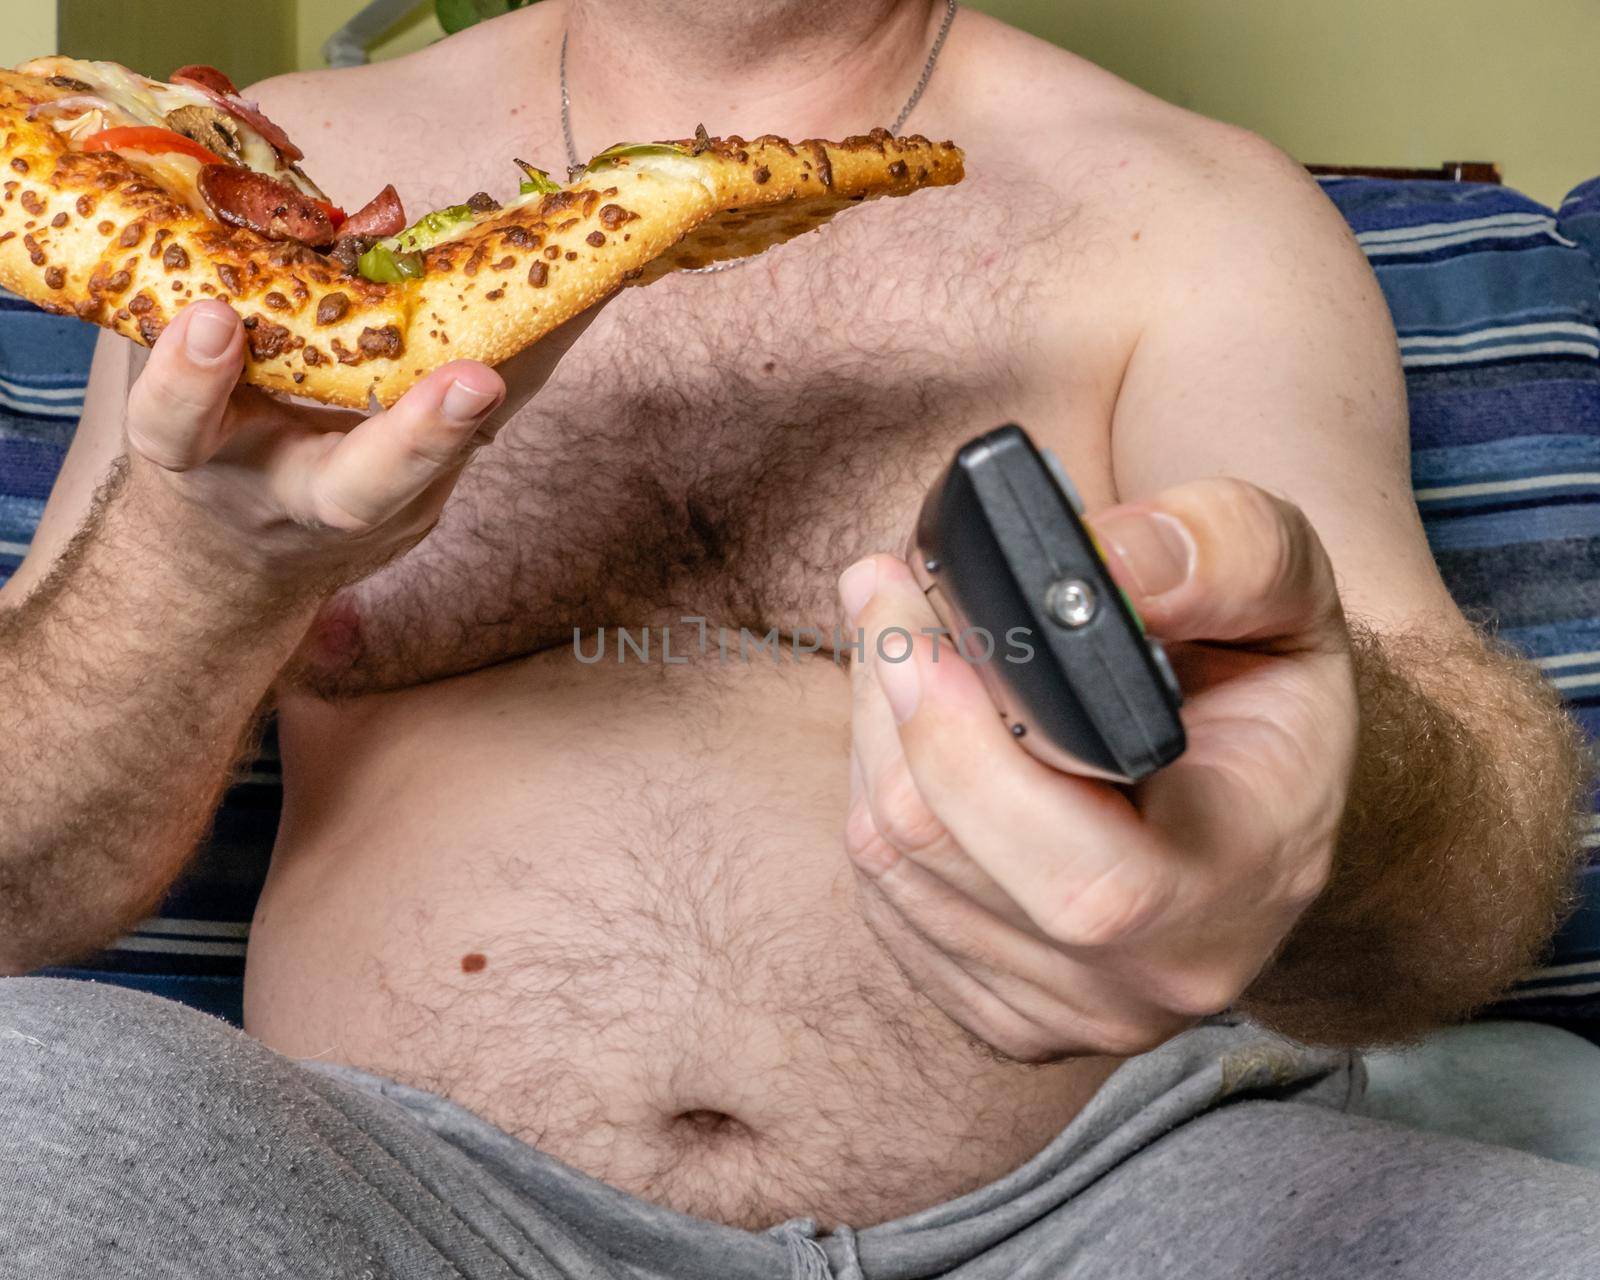 Fat man eating pizza and using TV remote, unhealthy lifestyle concept